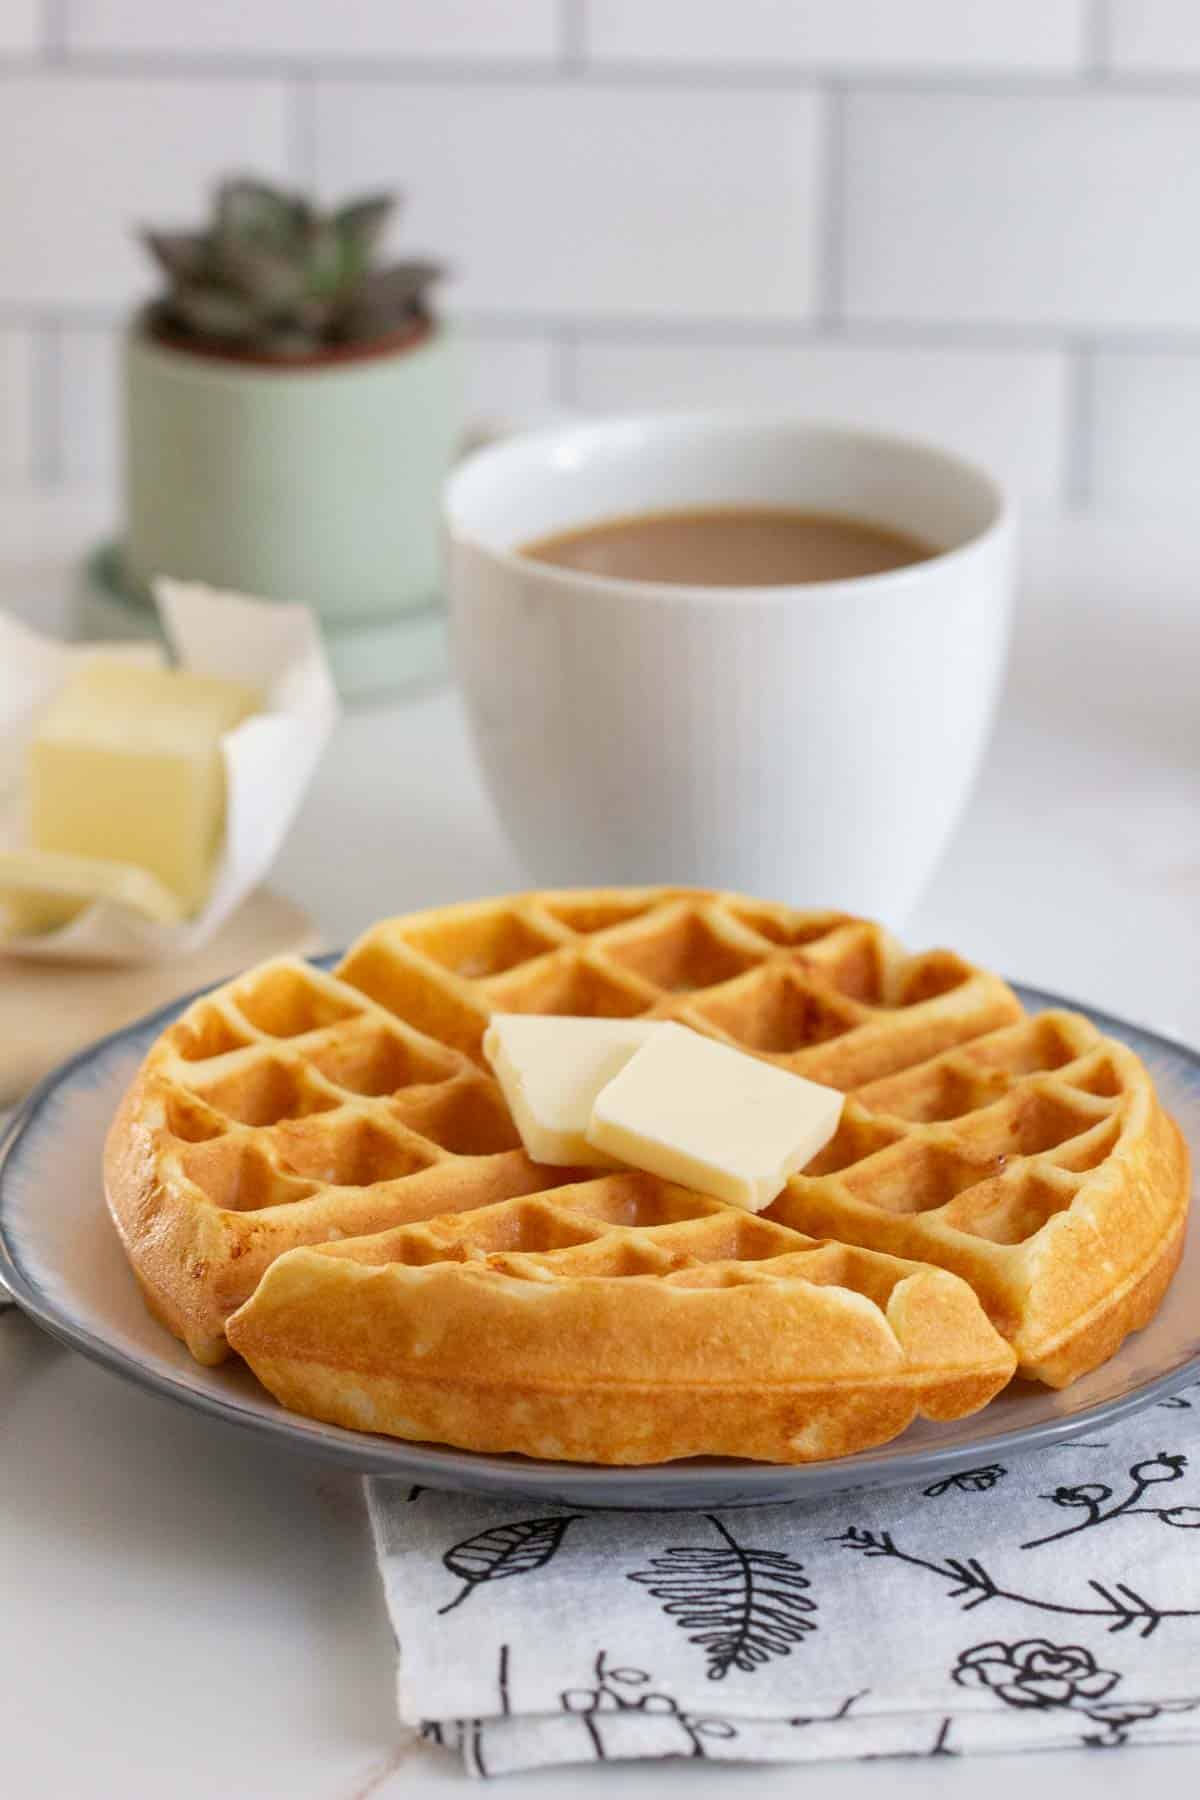 buttermilk waffle on plate with mug of coffee